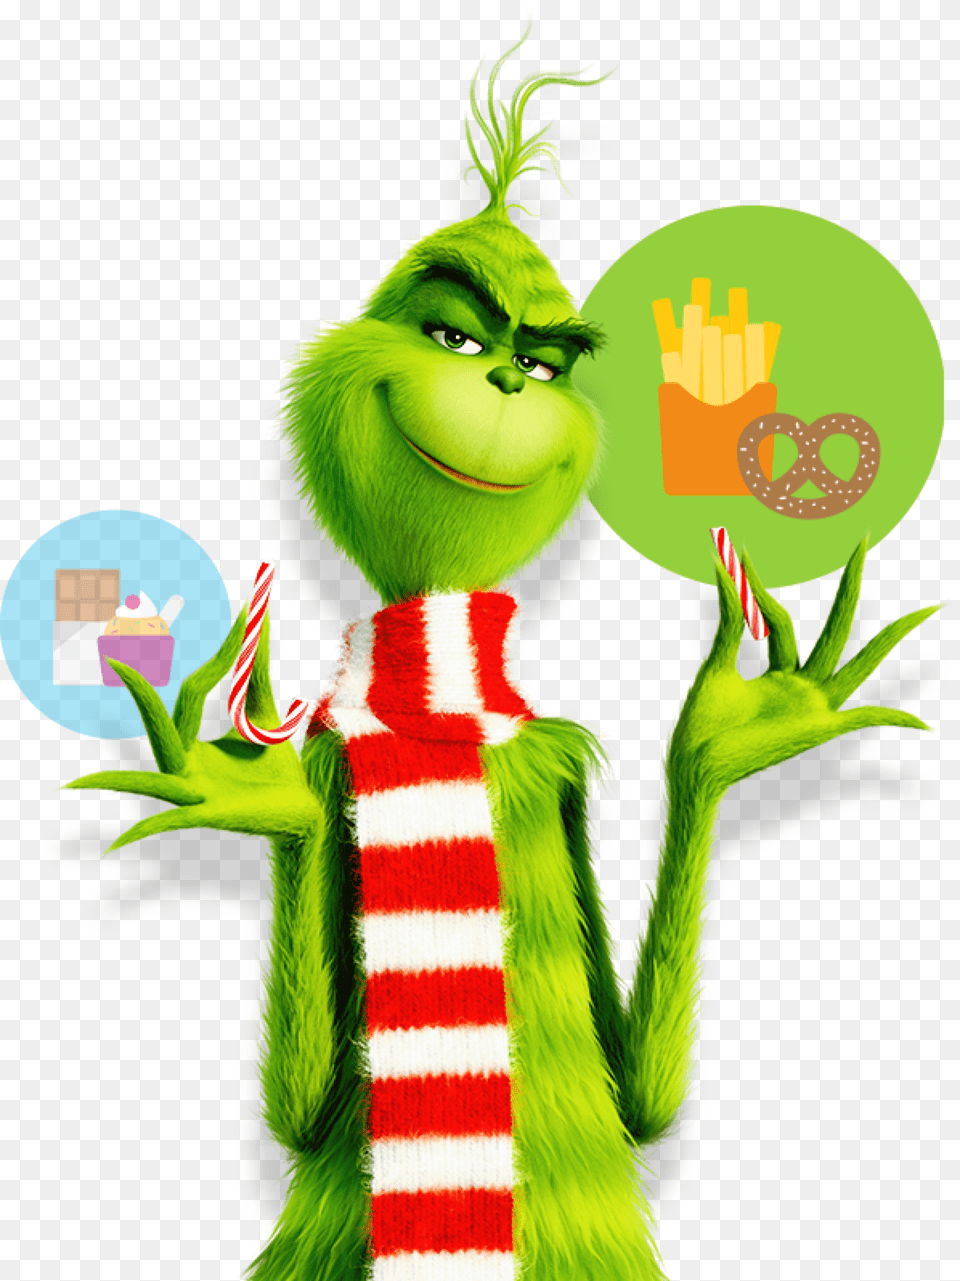 The Grinch Breaks A Sweet Candy Cane Grinch, Green, Elf, Art, Graphics Free Transparent Png